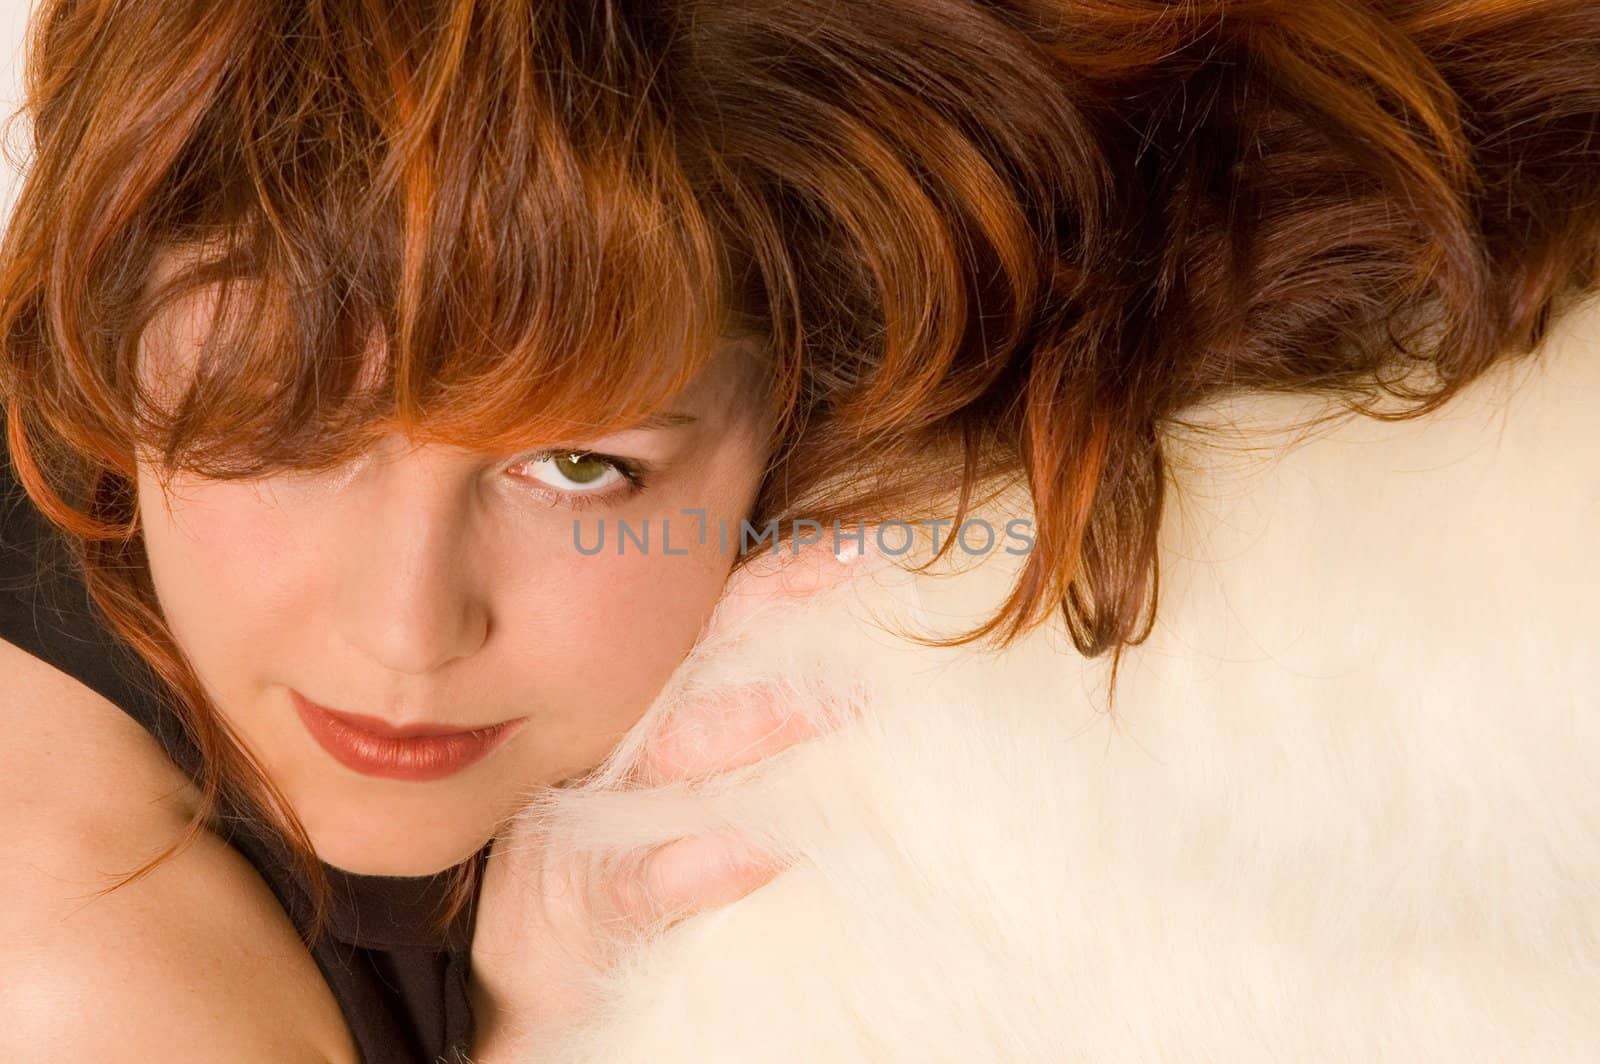 Young woman with red hairs, laying on the white carpet. Green eye looking strait into the camera